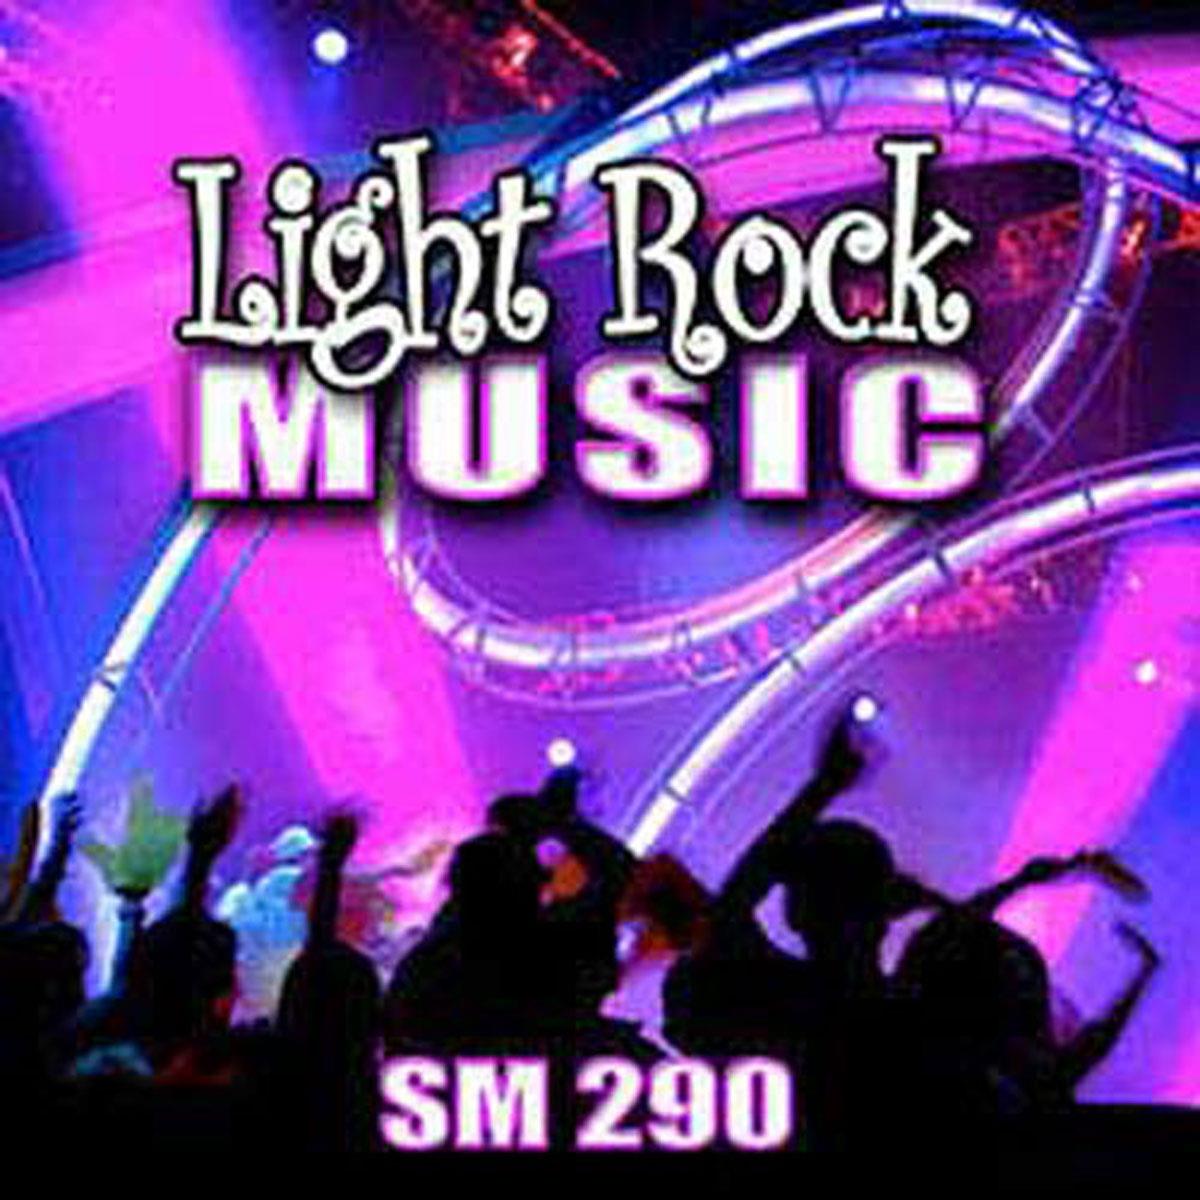 Image of Sound Ideas Royalty Free Music Light Rock Music Software